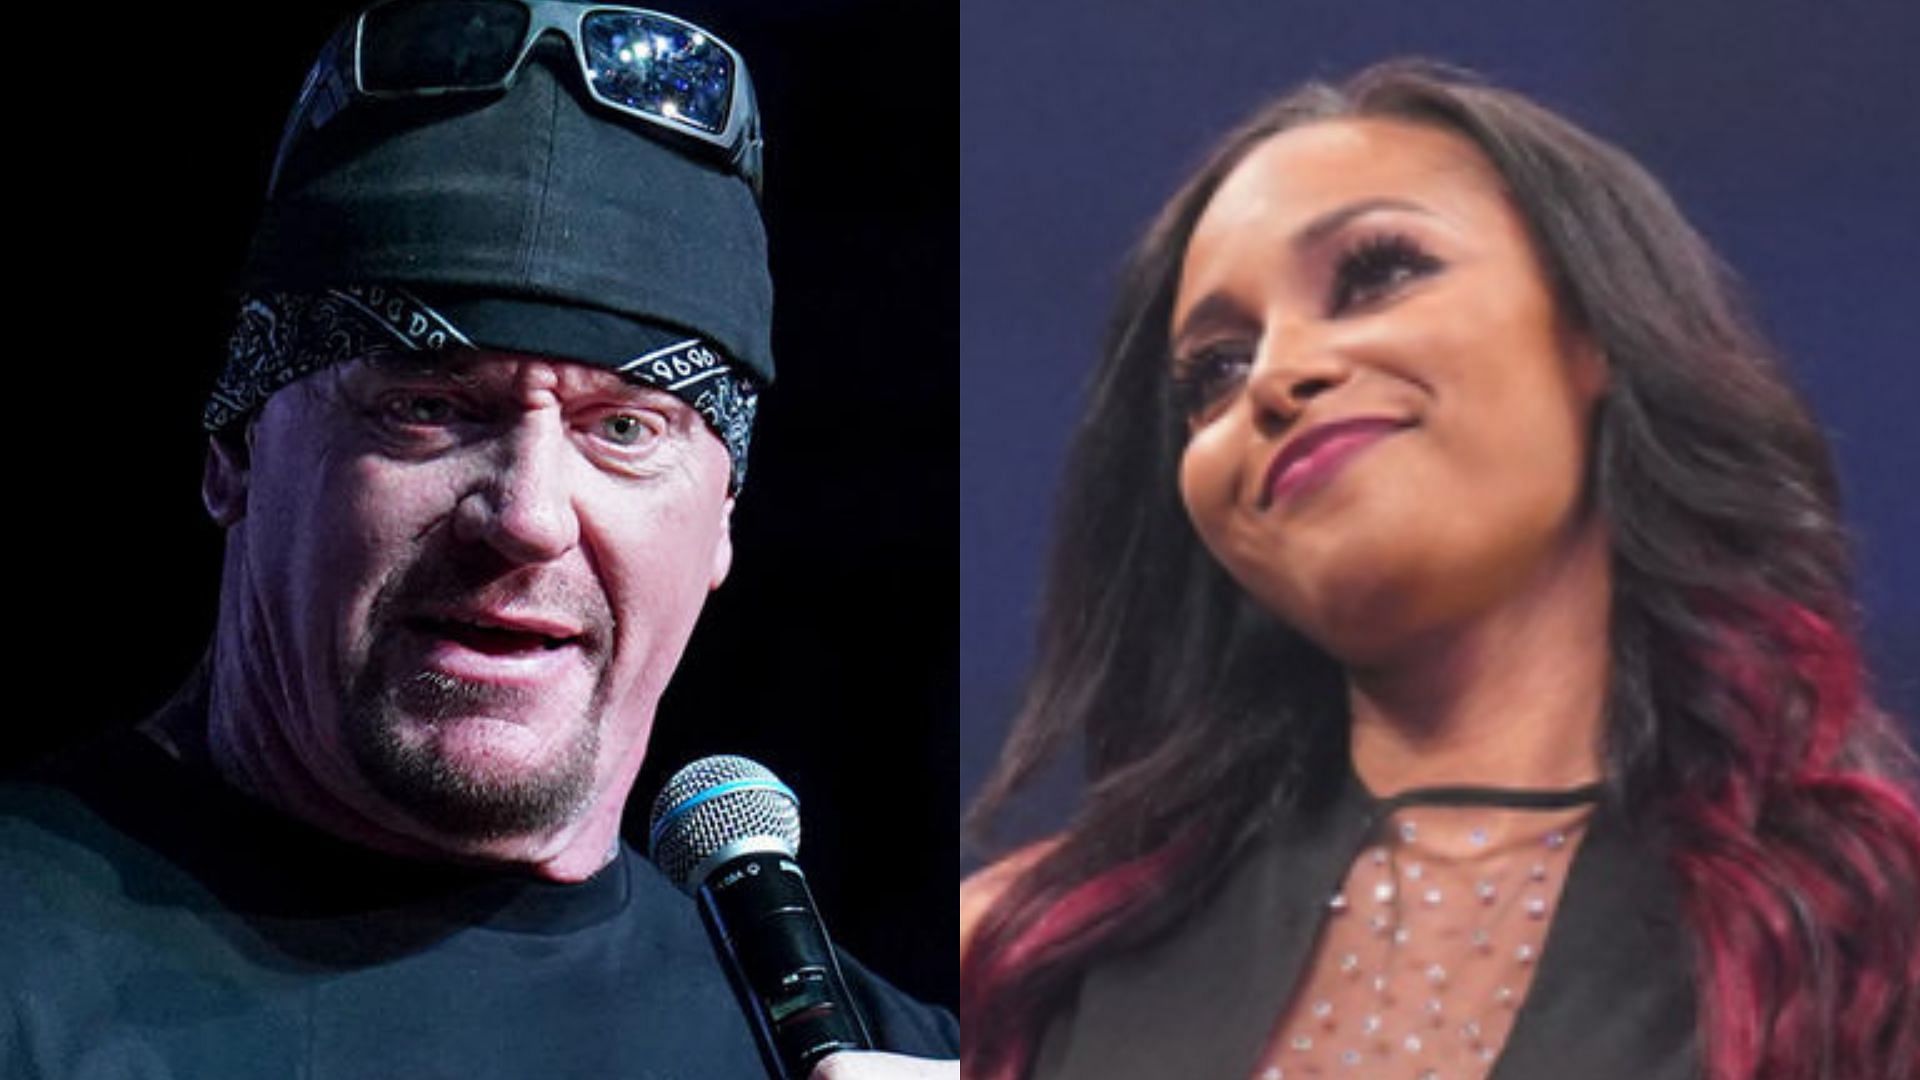 What happened backstage at WrestleMania 38 between Brandi Rhodes and The Undertaker?